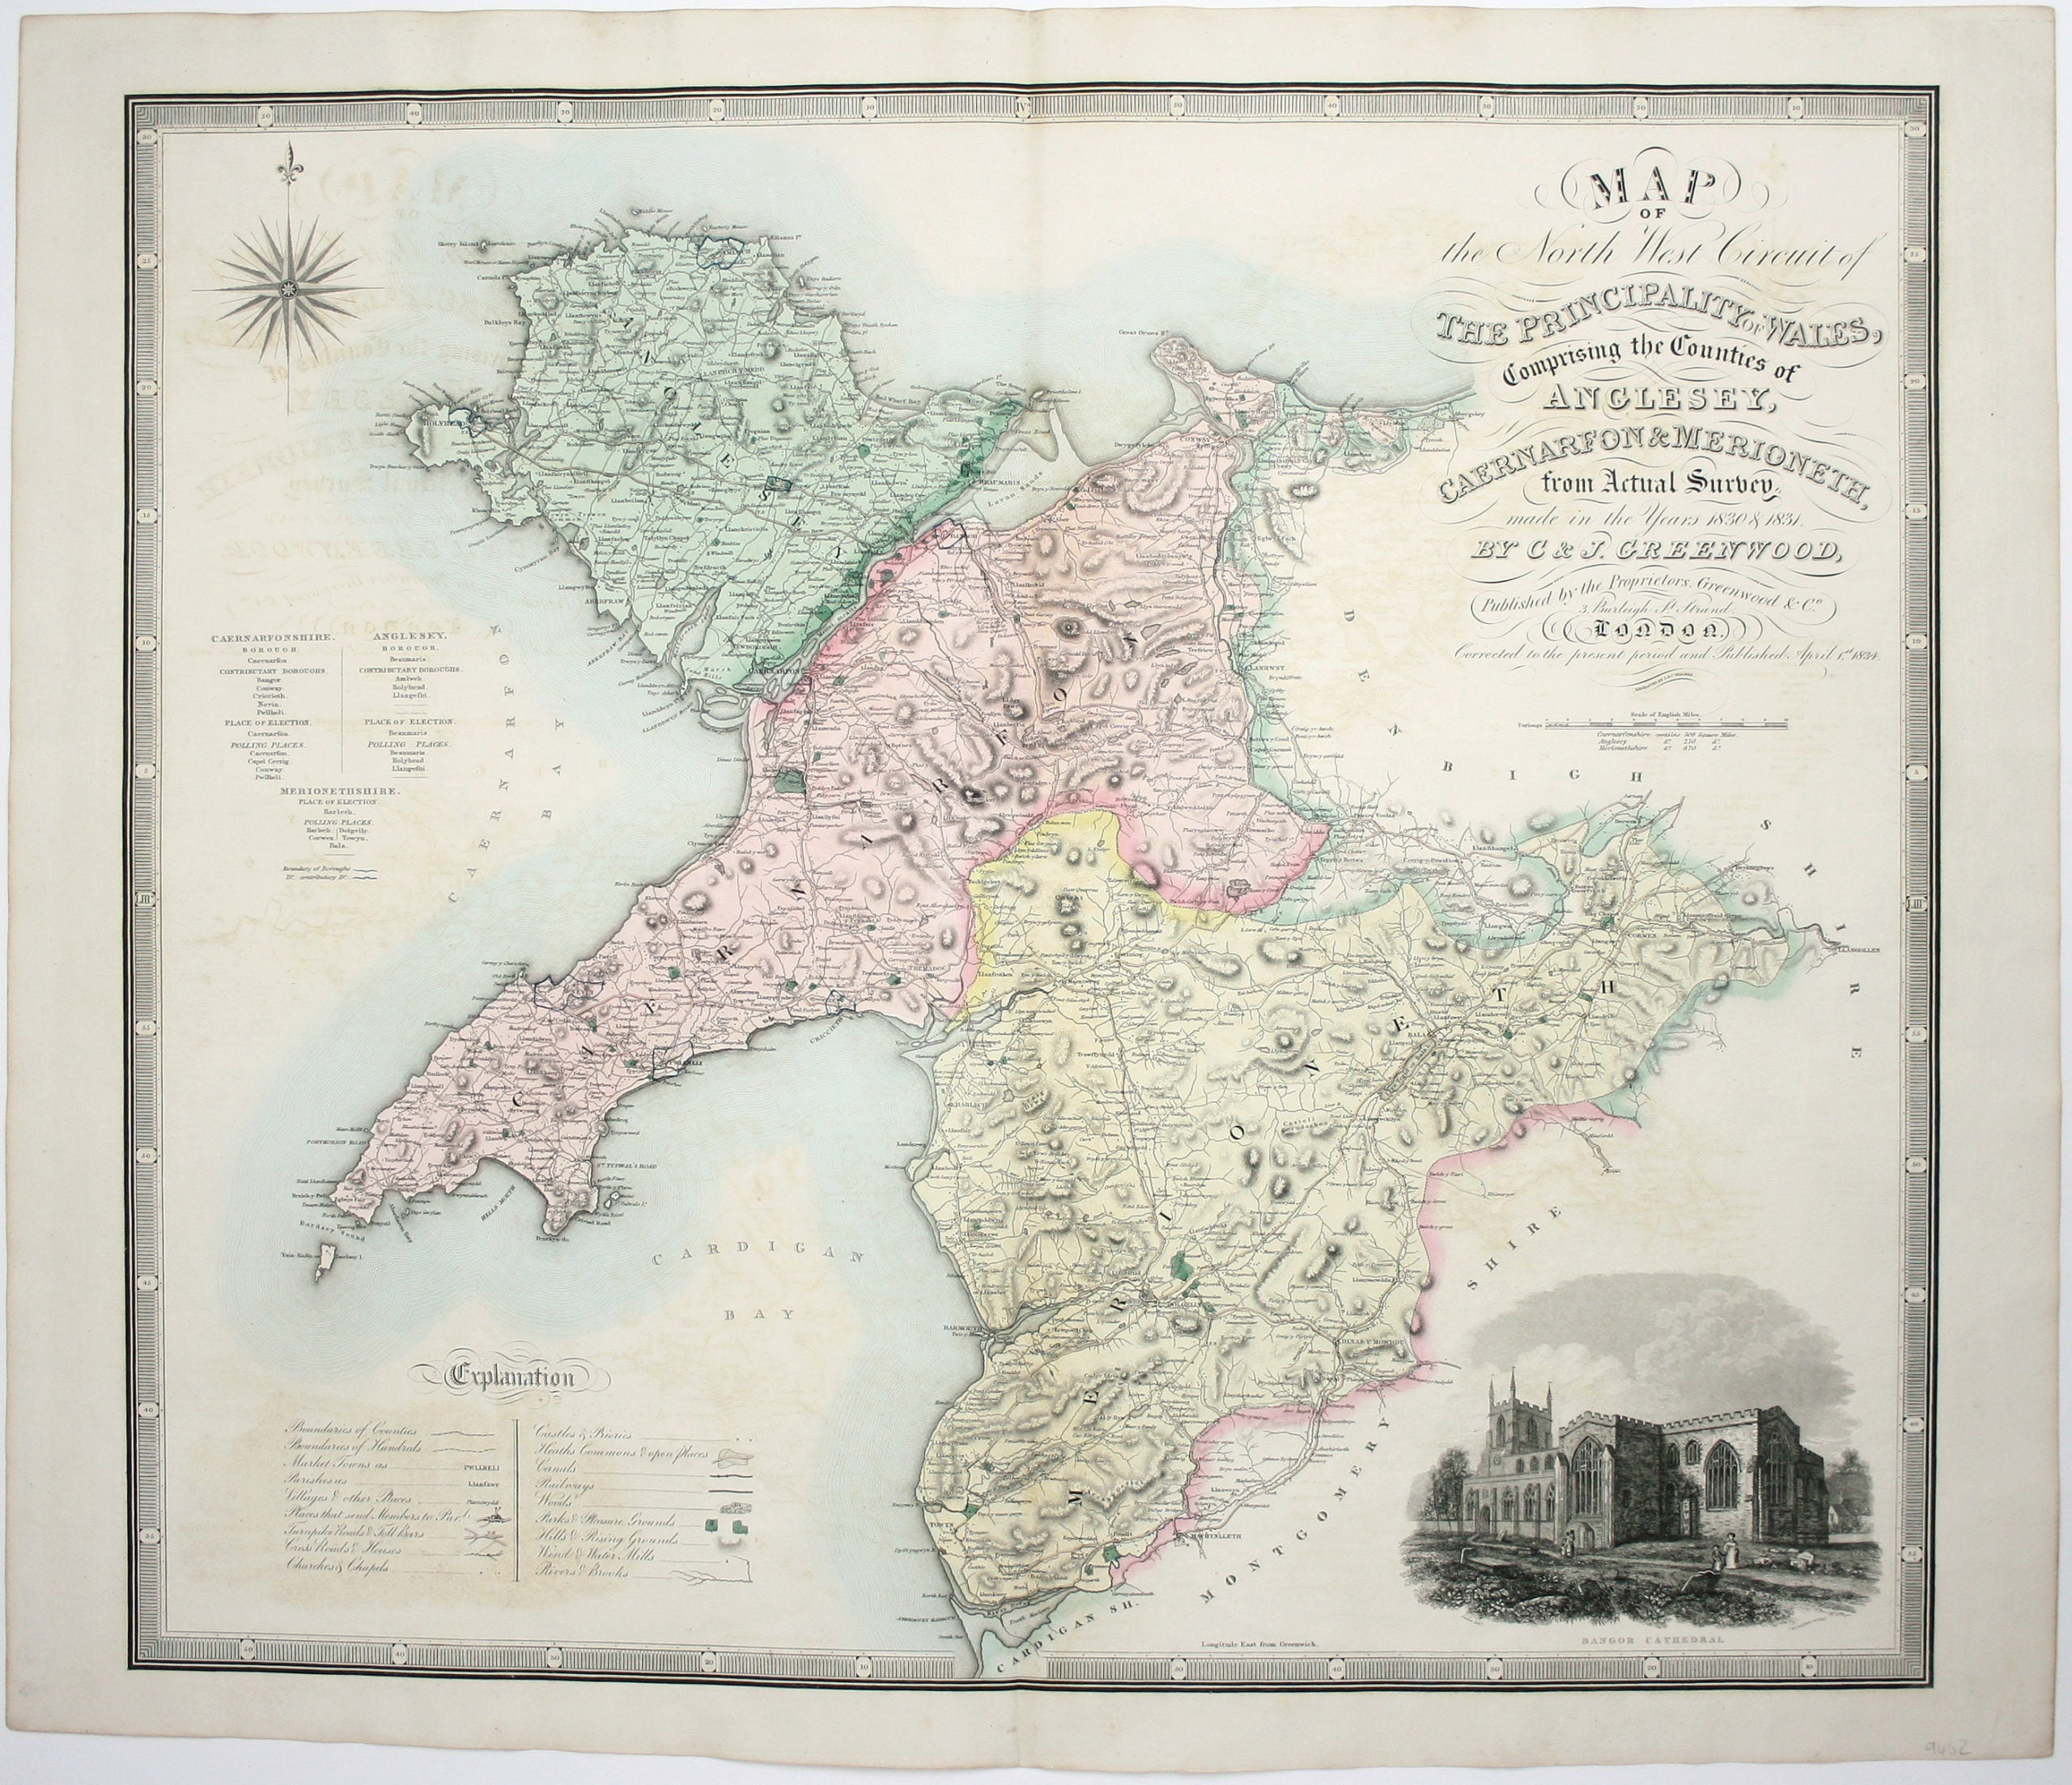 Greenwood’s Map of North Wales